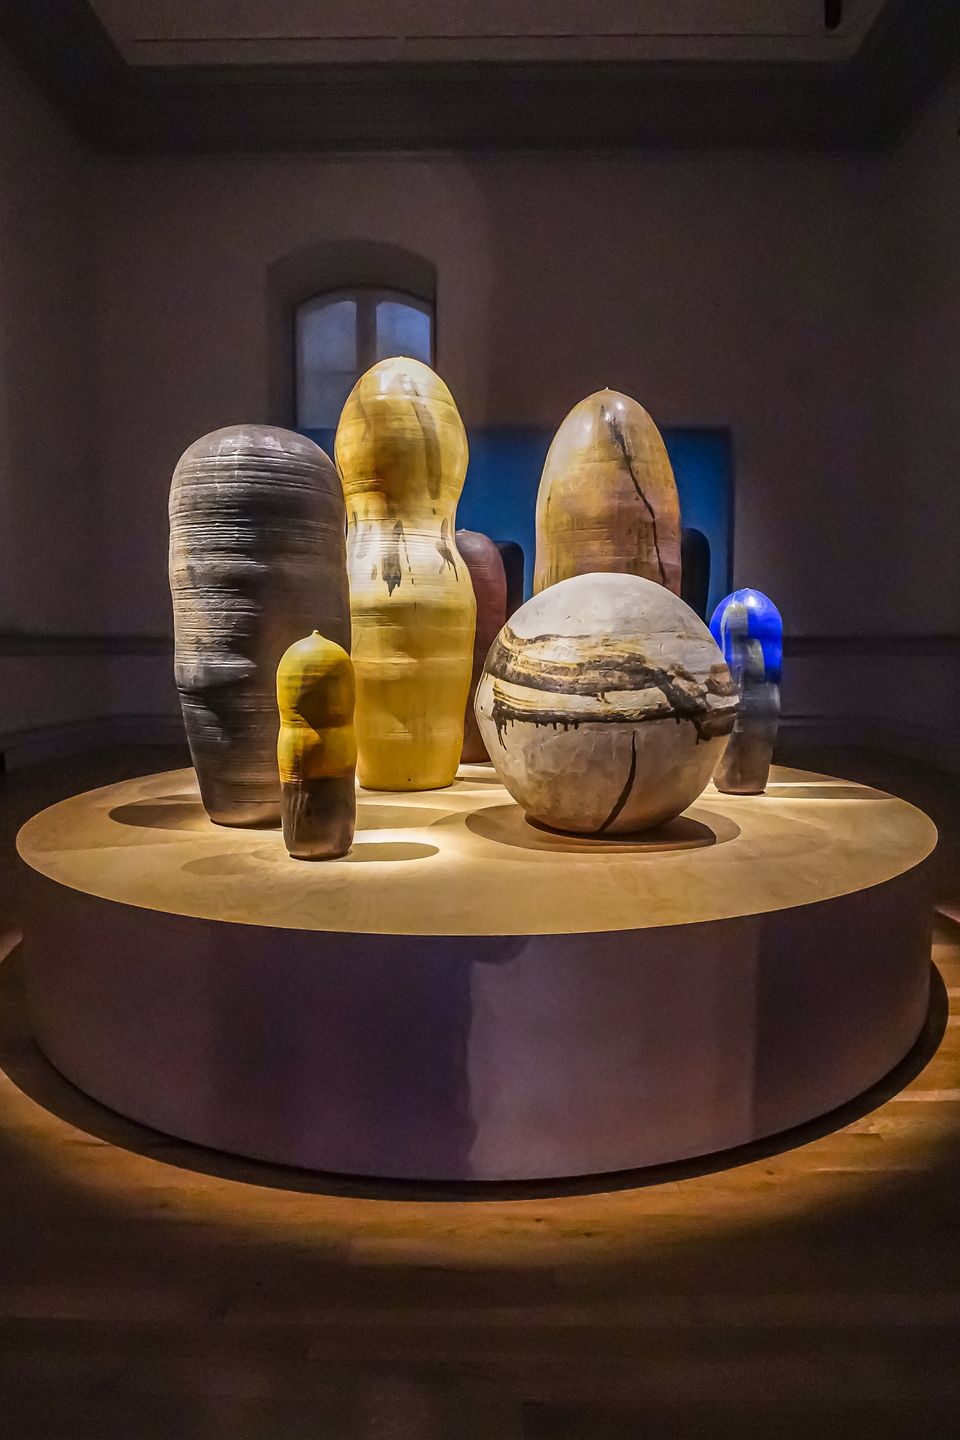 A group of ceramic sculptures on a round pedastal